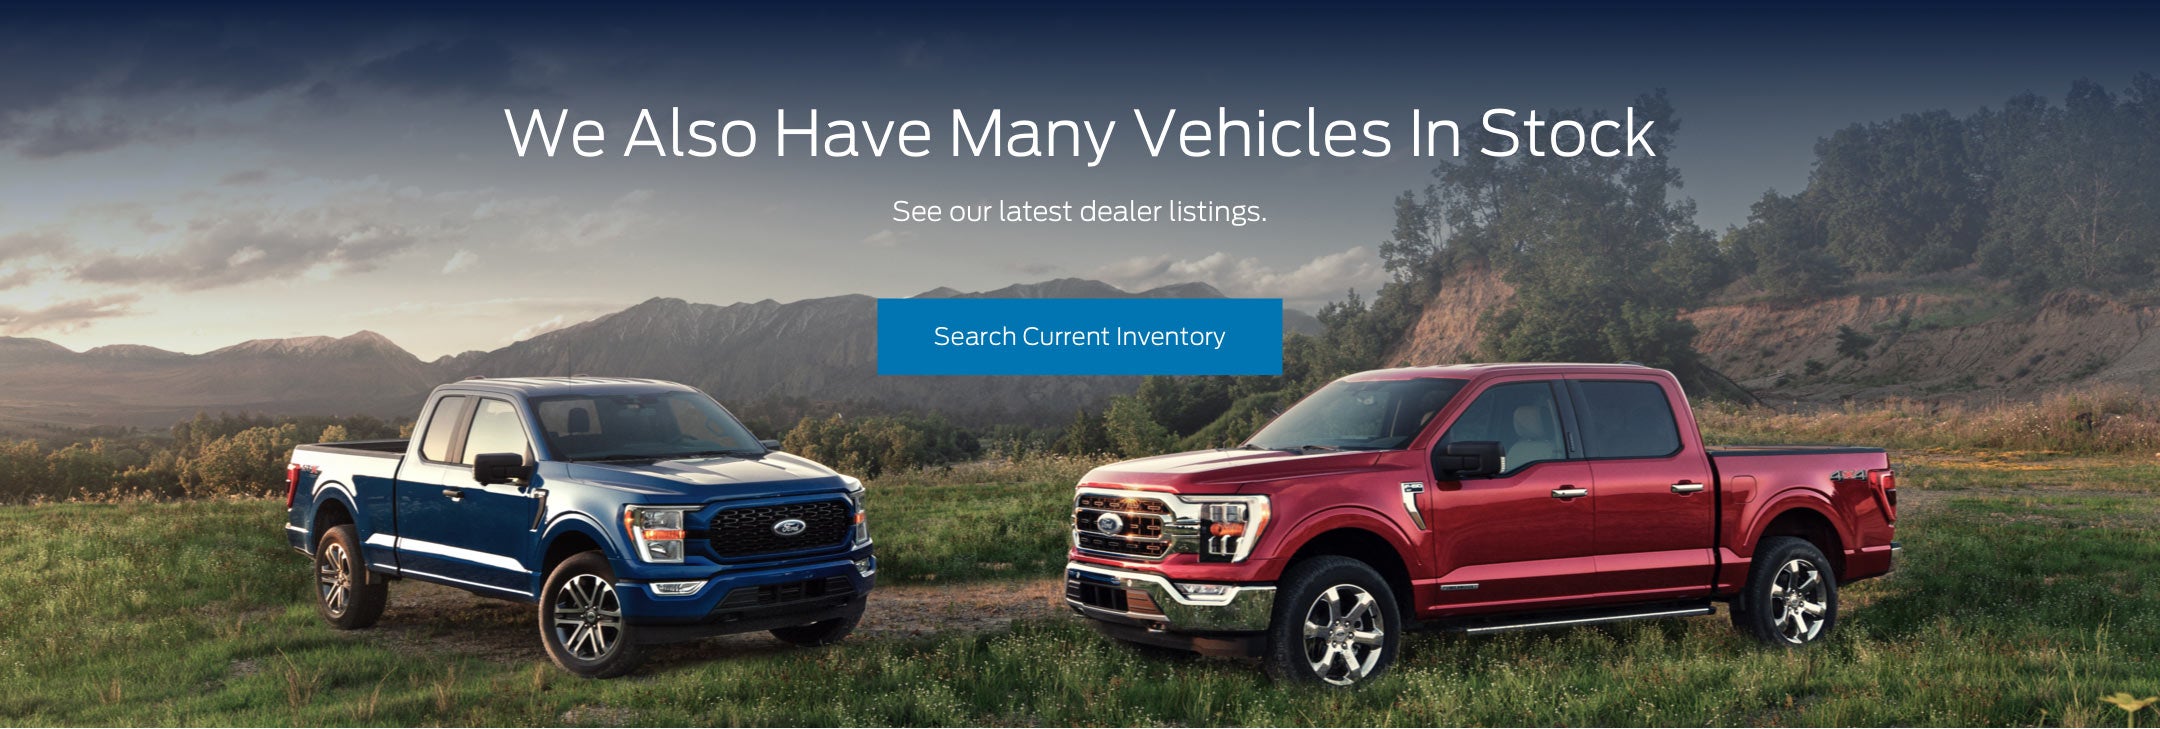 Ford vehicles in stock | Freedom Ford Greenville by Ed Morse in Greenville TX